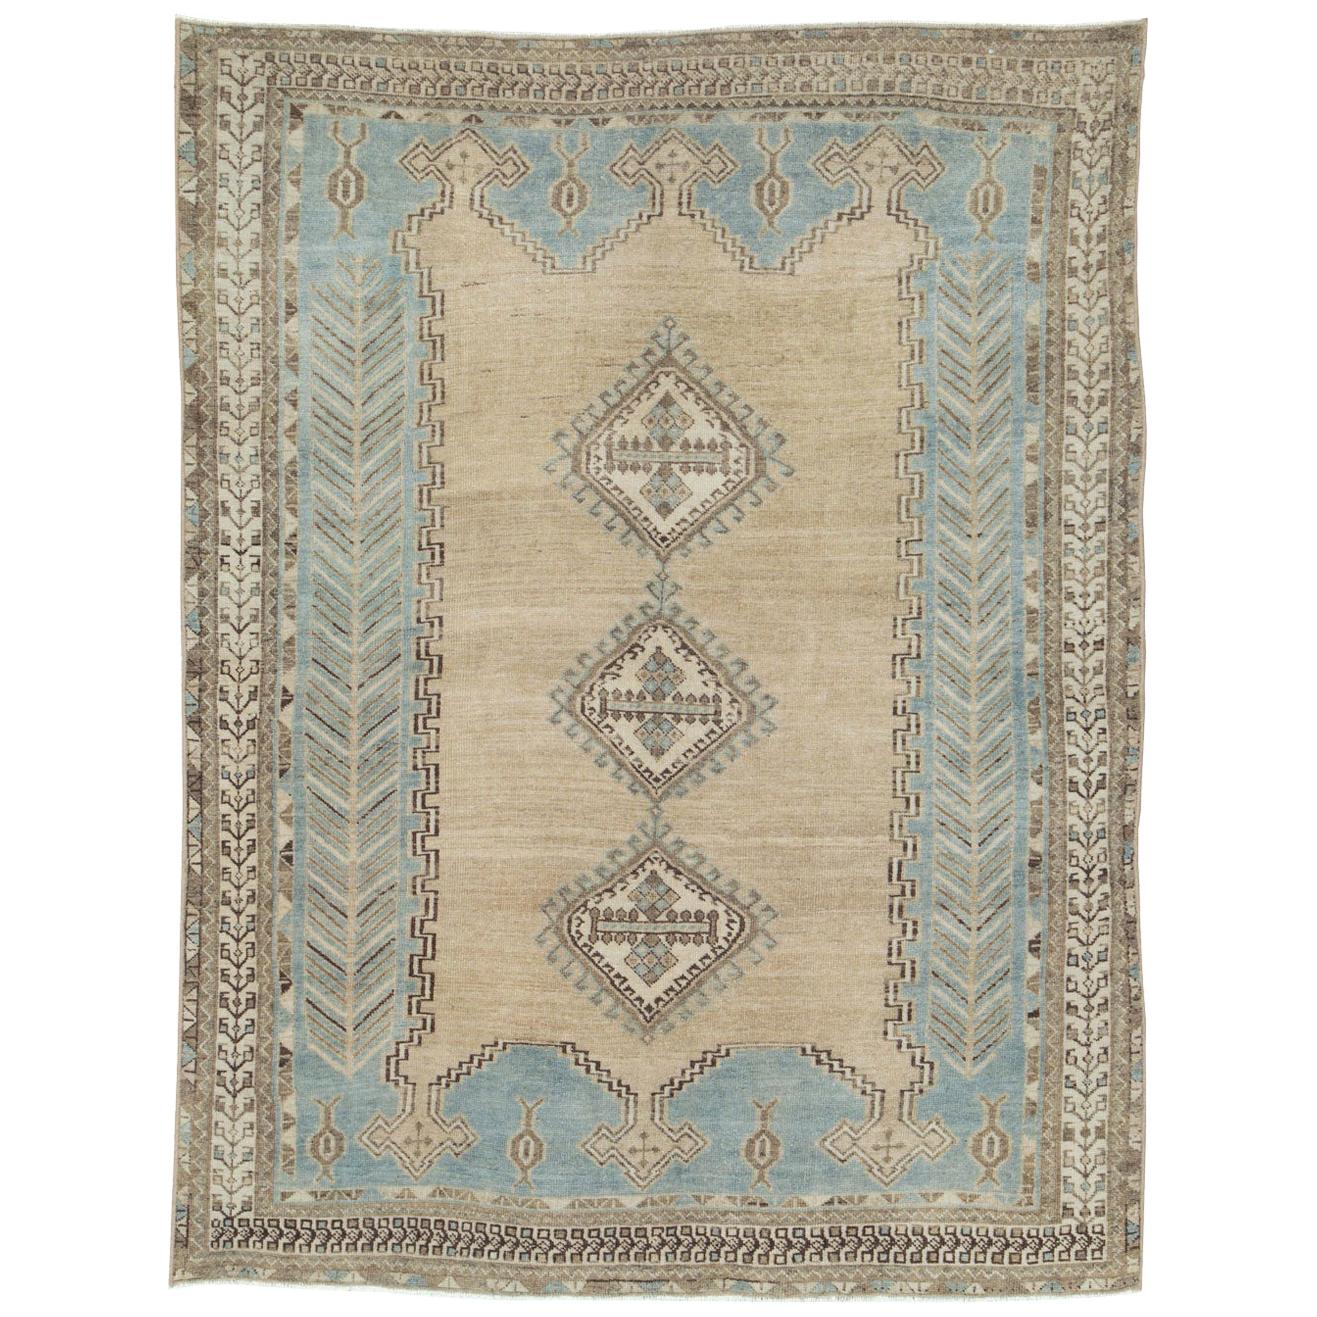 Mid-20th Century Handmade Persian Afshar Accent Rug in Light Grey and Cream